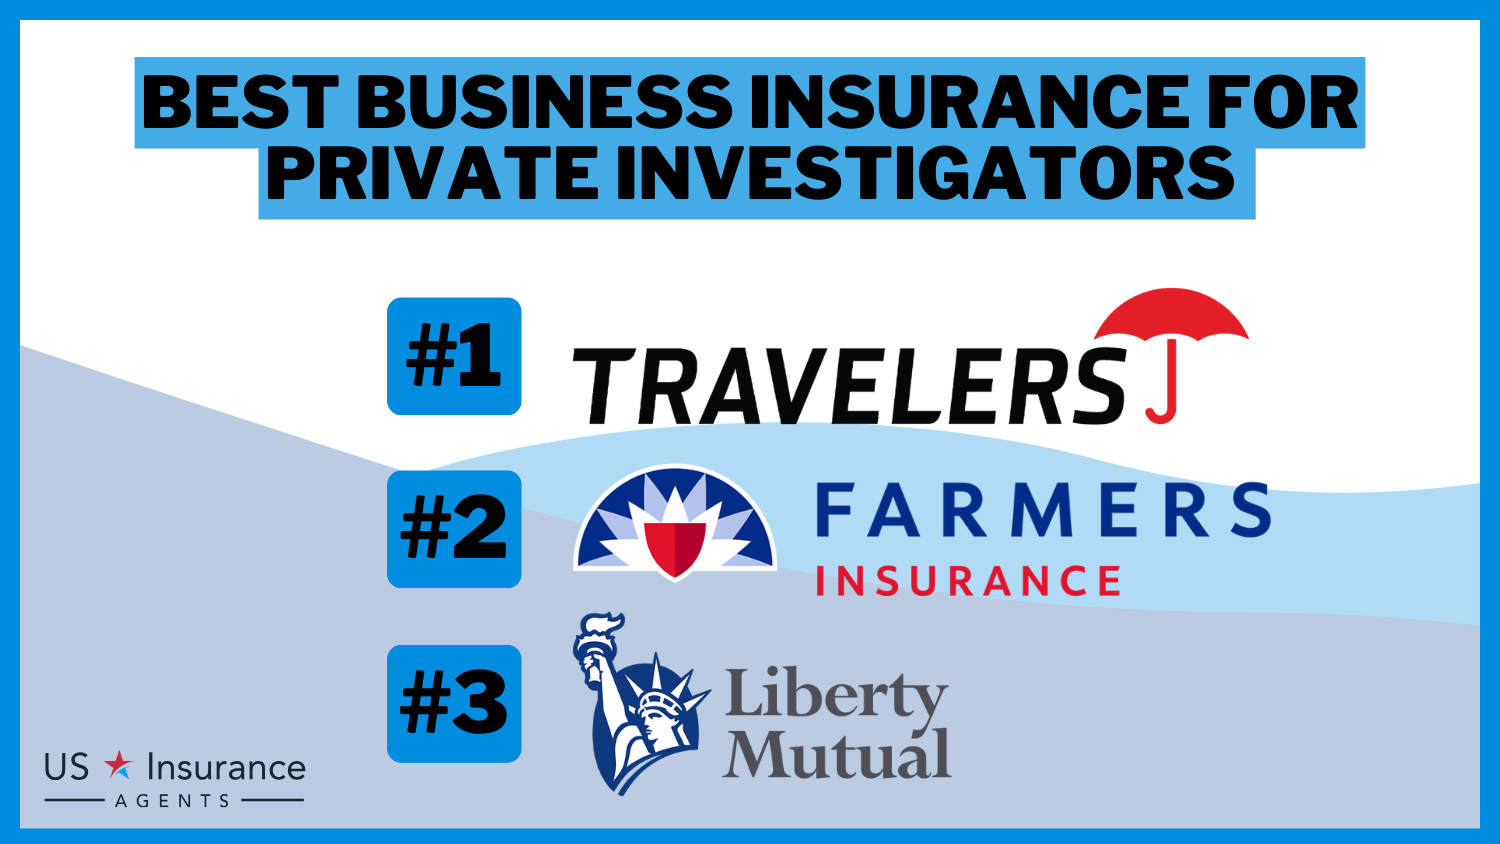 3 Best Business Insurance for Private Investigators: Travelers, Farmers, and Liberty Mutual.